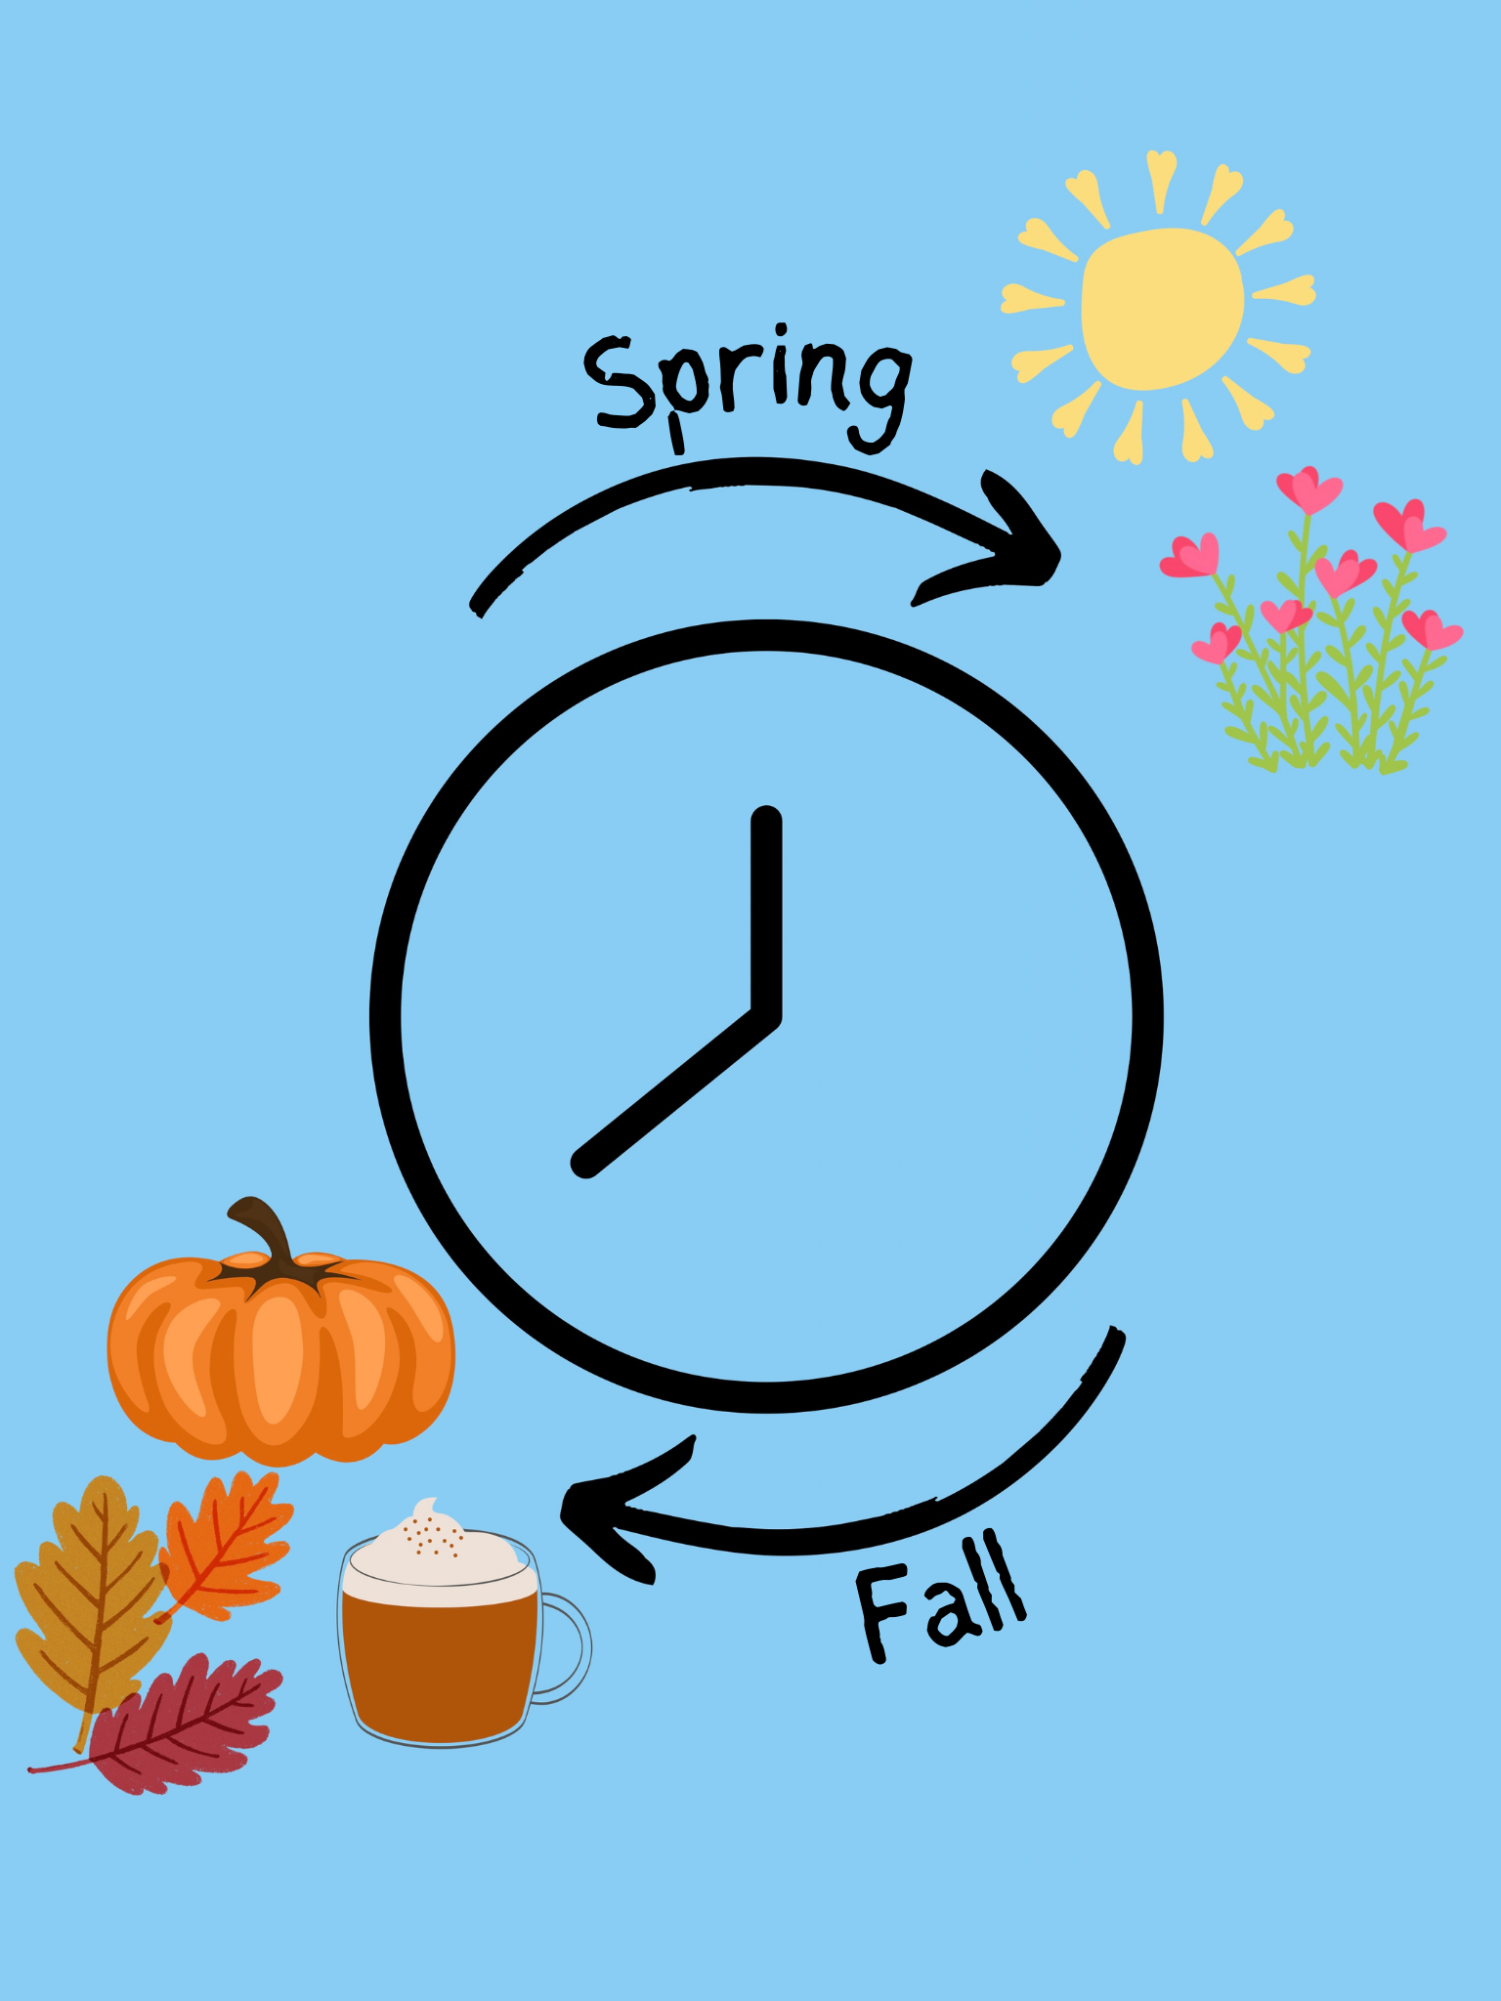 Daylight savings time: springing forward into Spring and falling back into fall.